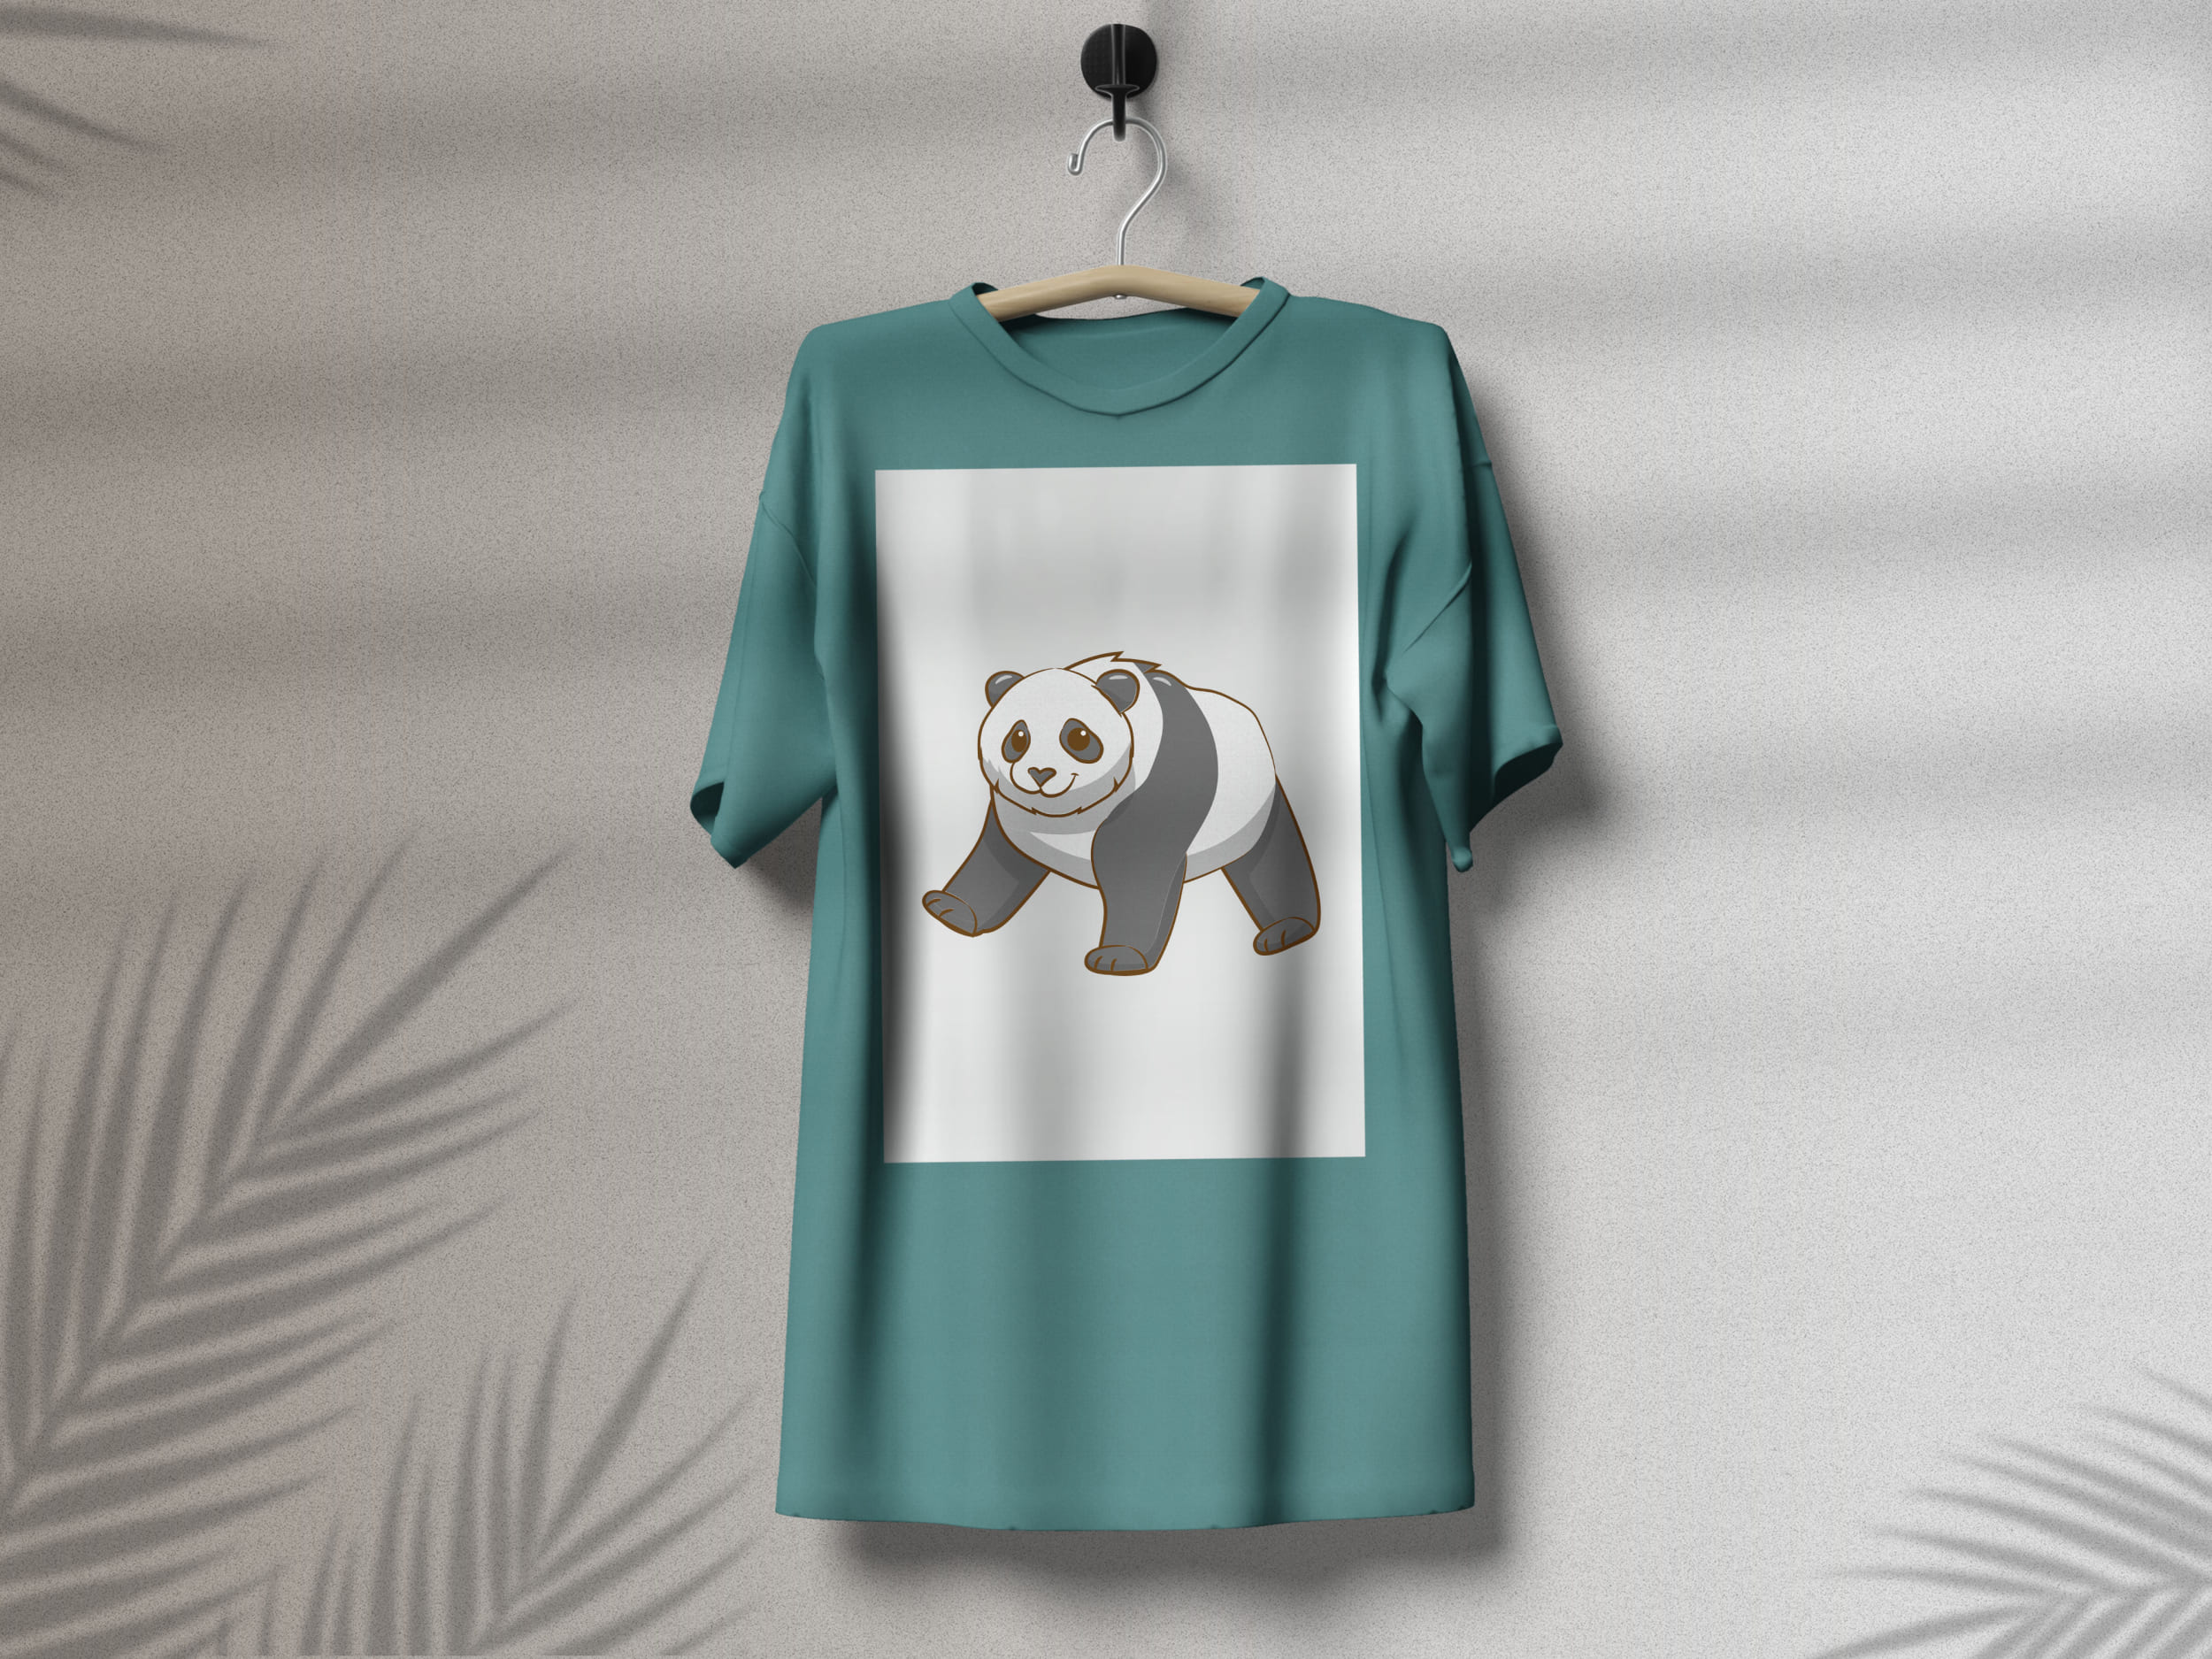 Turquoise t-shirt with a cute panda on a white background, on a hanger on a gray background